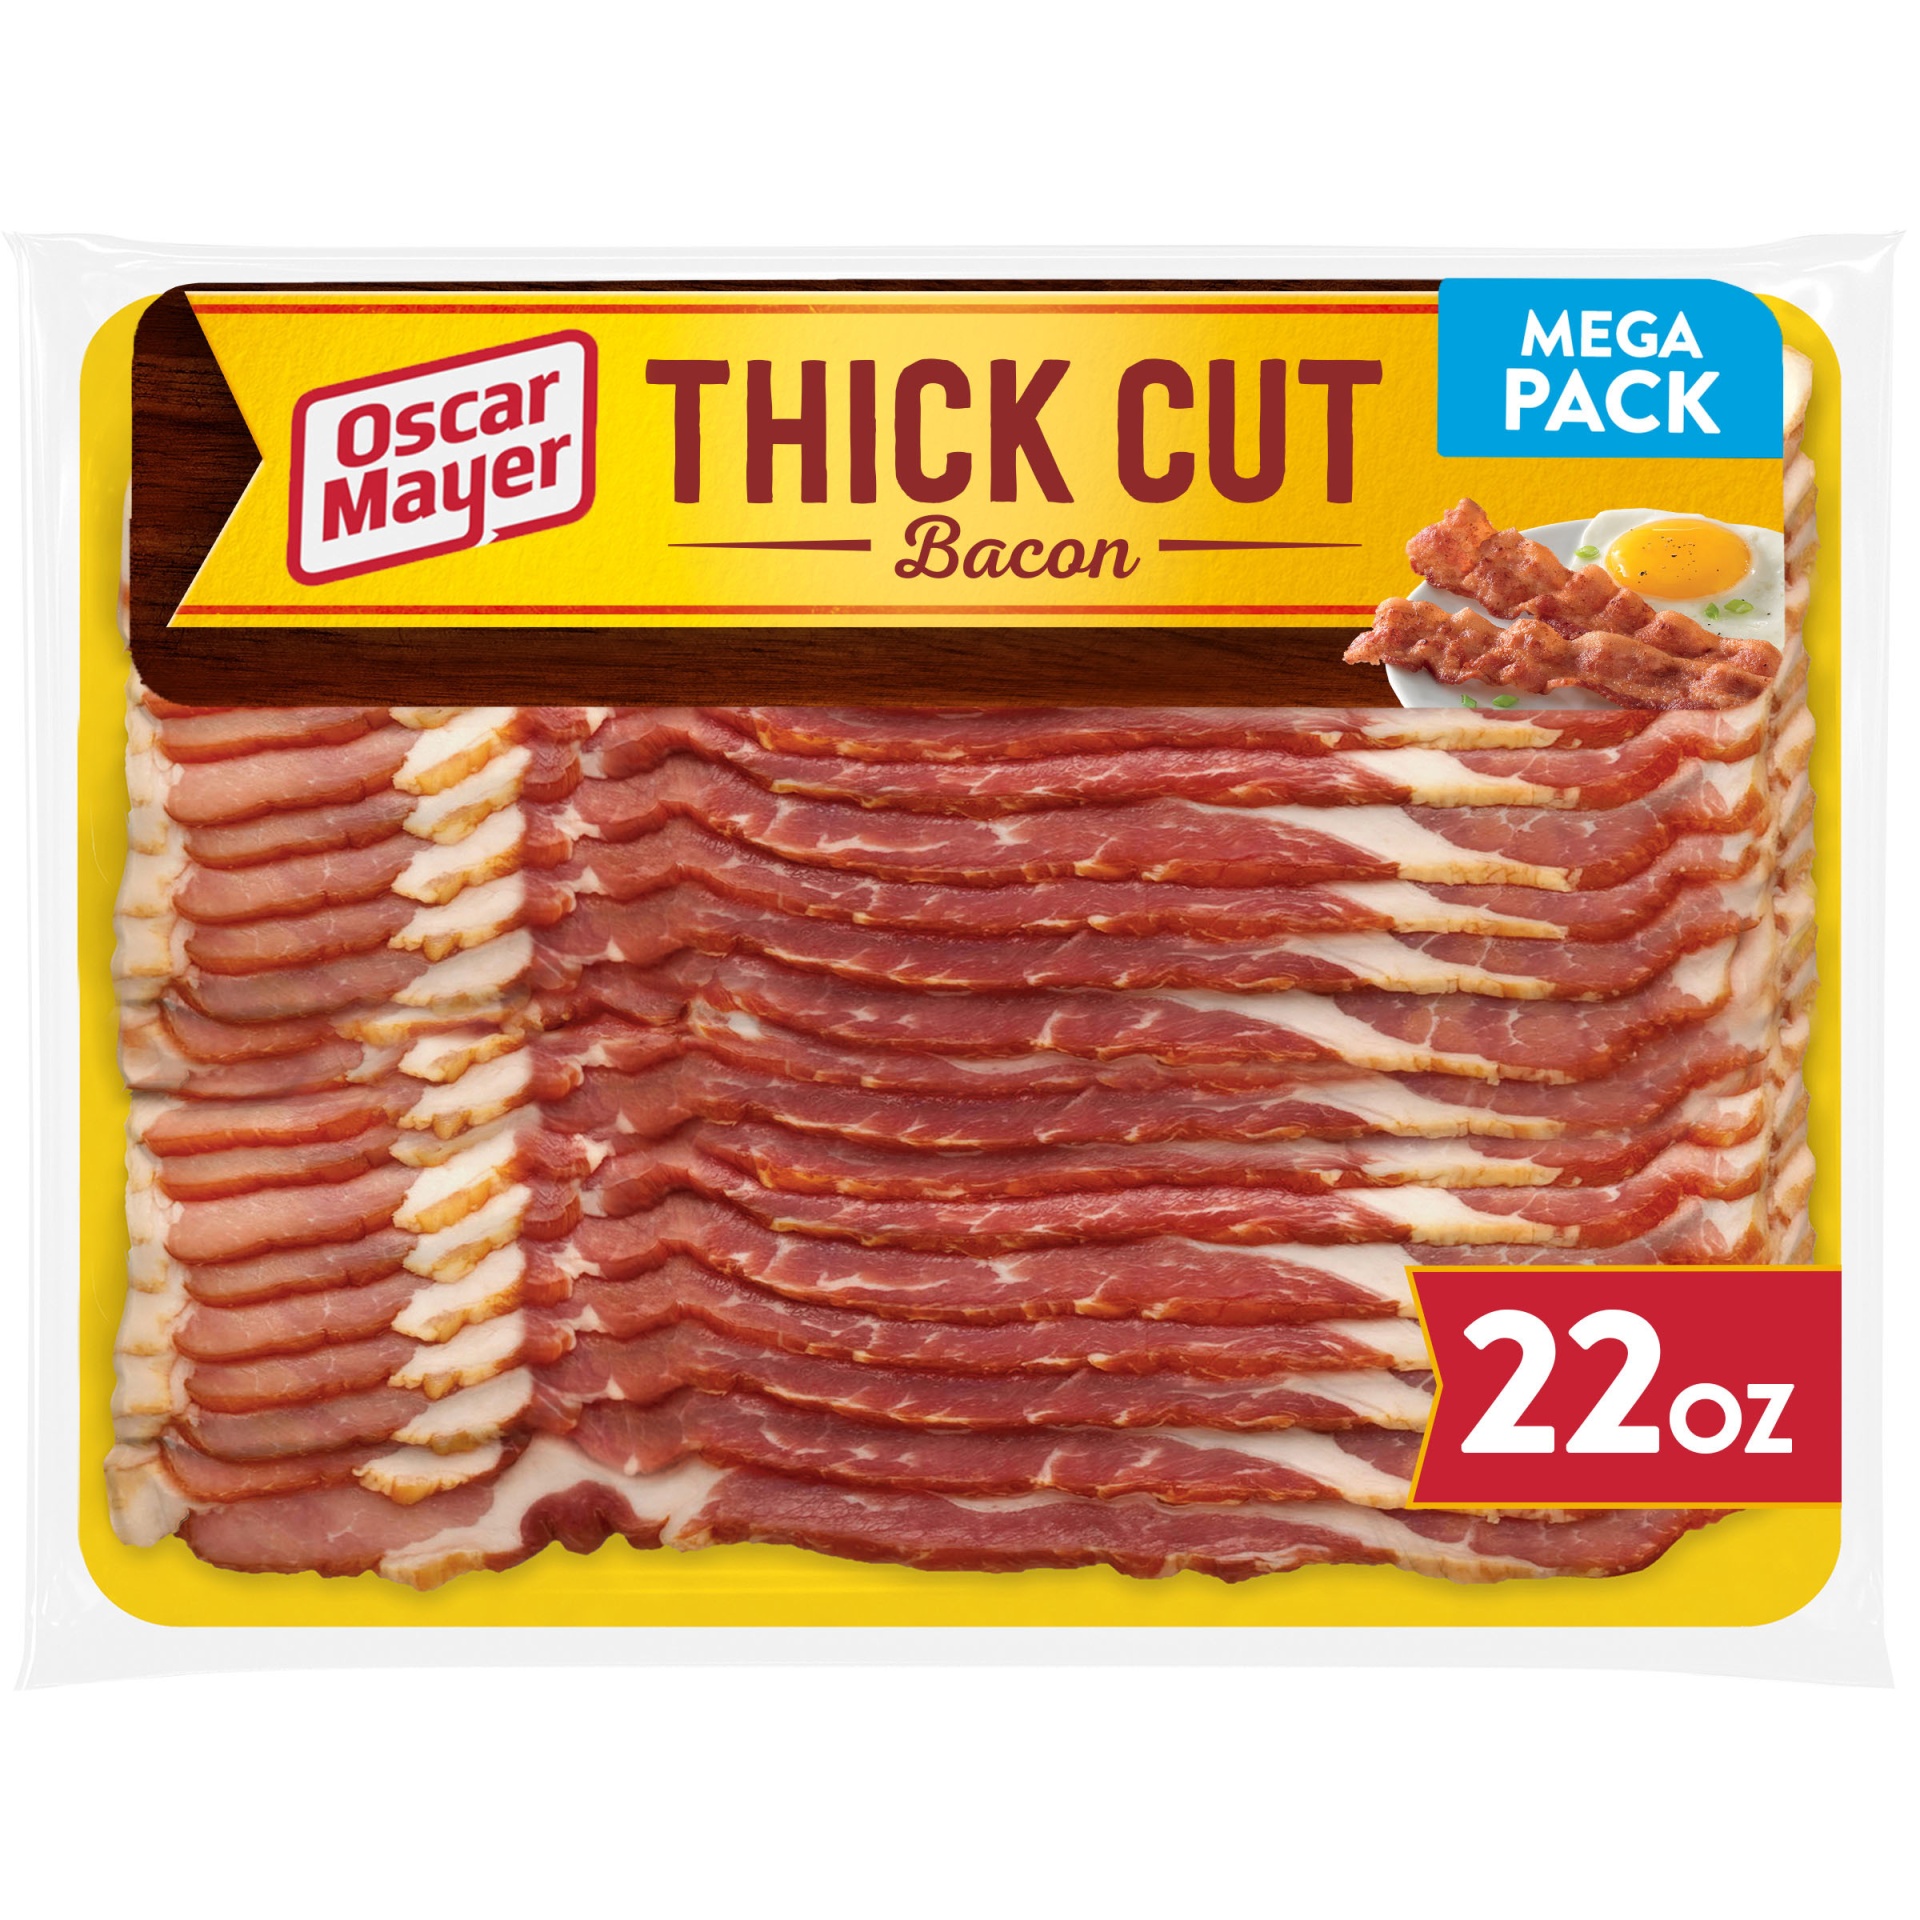 slide 1 of 1, Oscar Mayer Naturally Hardwood Smoked Thick Cut Bacon Mega Pack Pack, 15-17 Slices, 22 oz